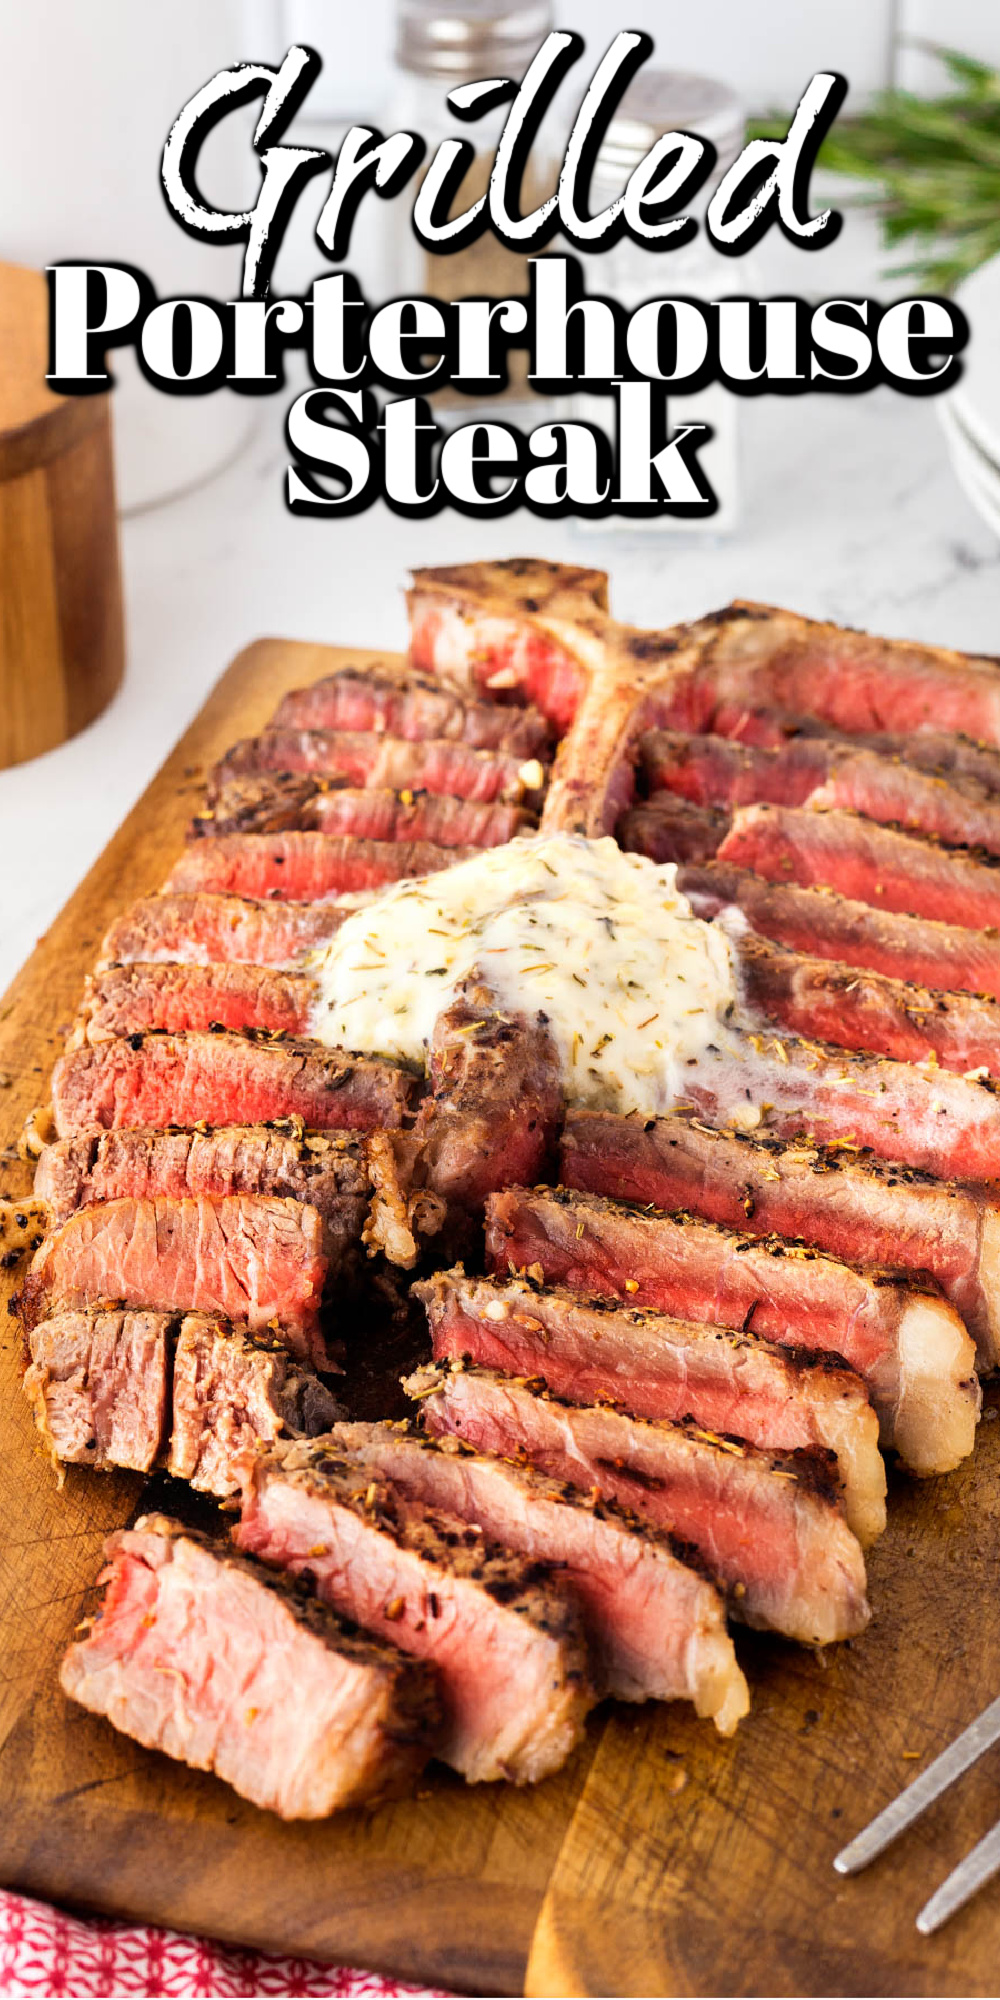 This grilled porterhouse steak recipe is going to transport you to your favorite classic steakhouse it's that good!